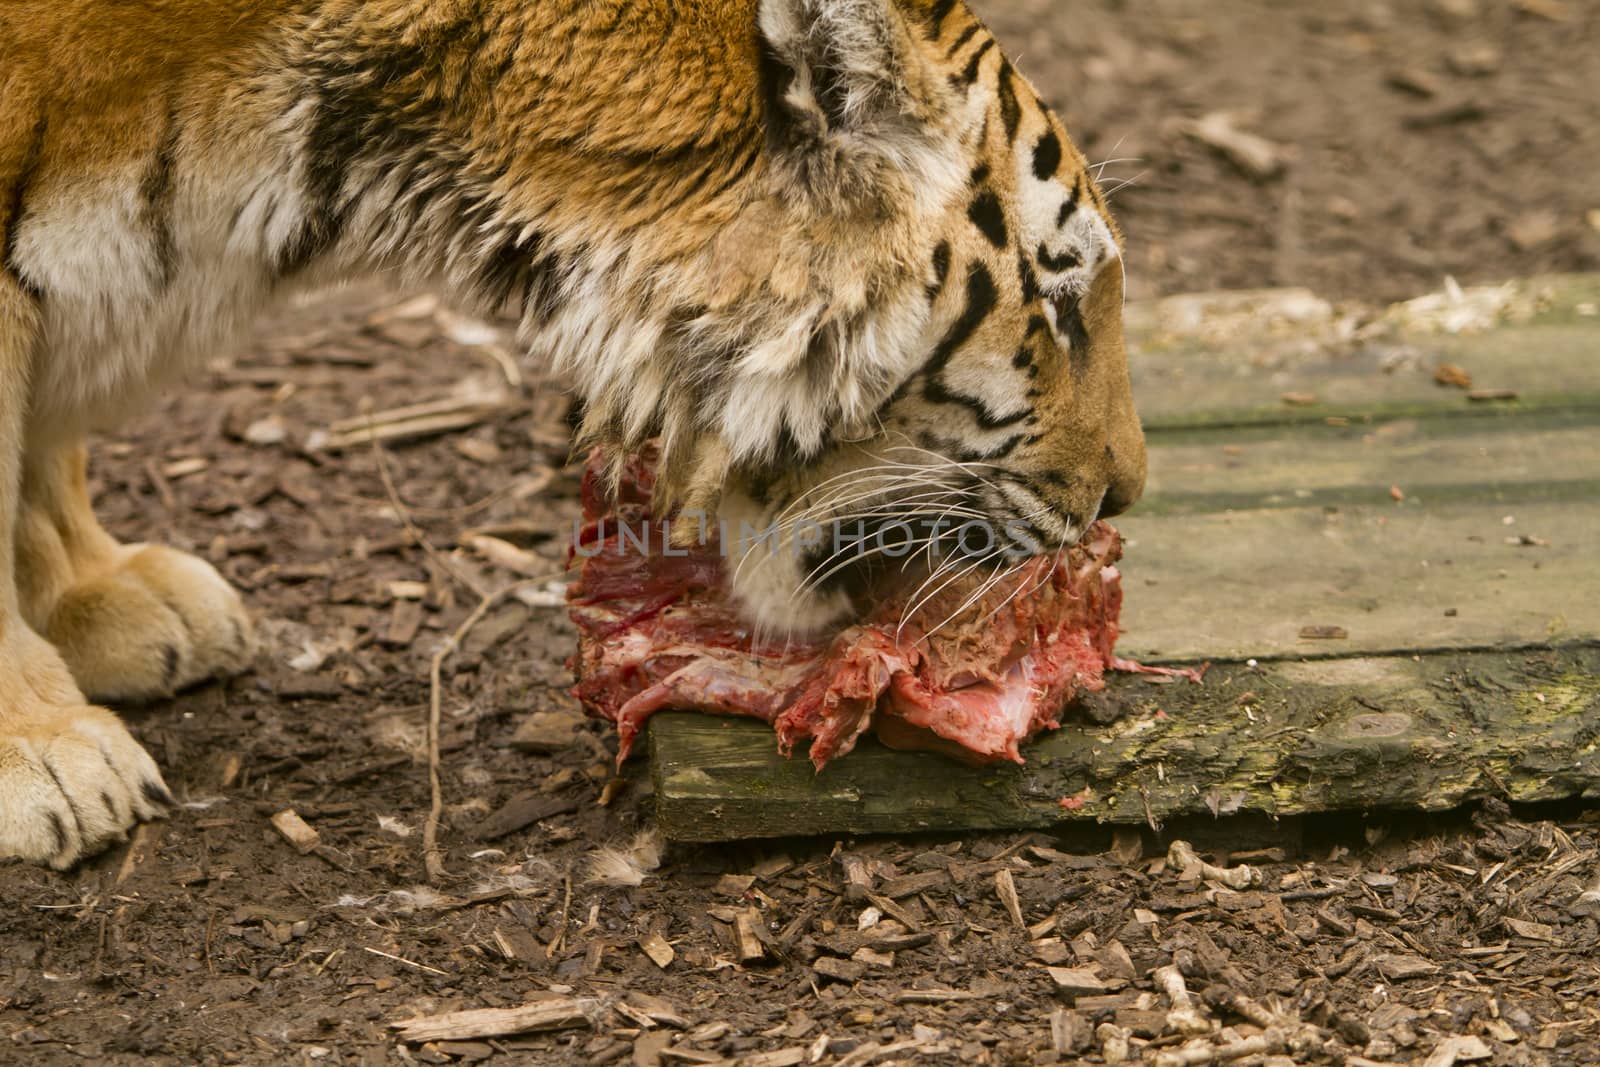 Tiger with a piece of meat